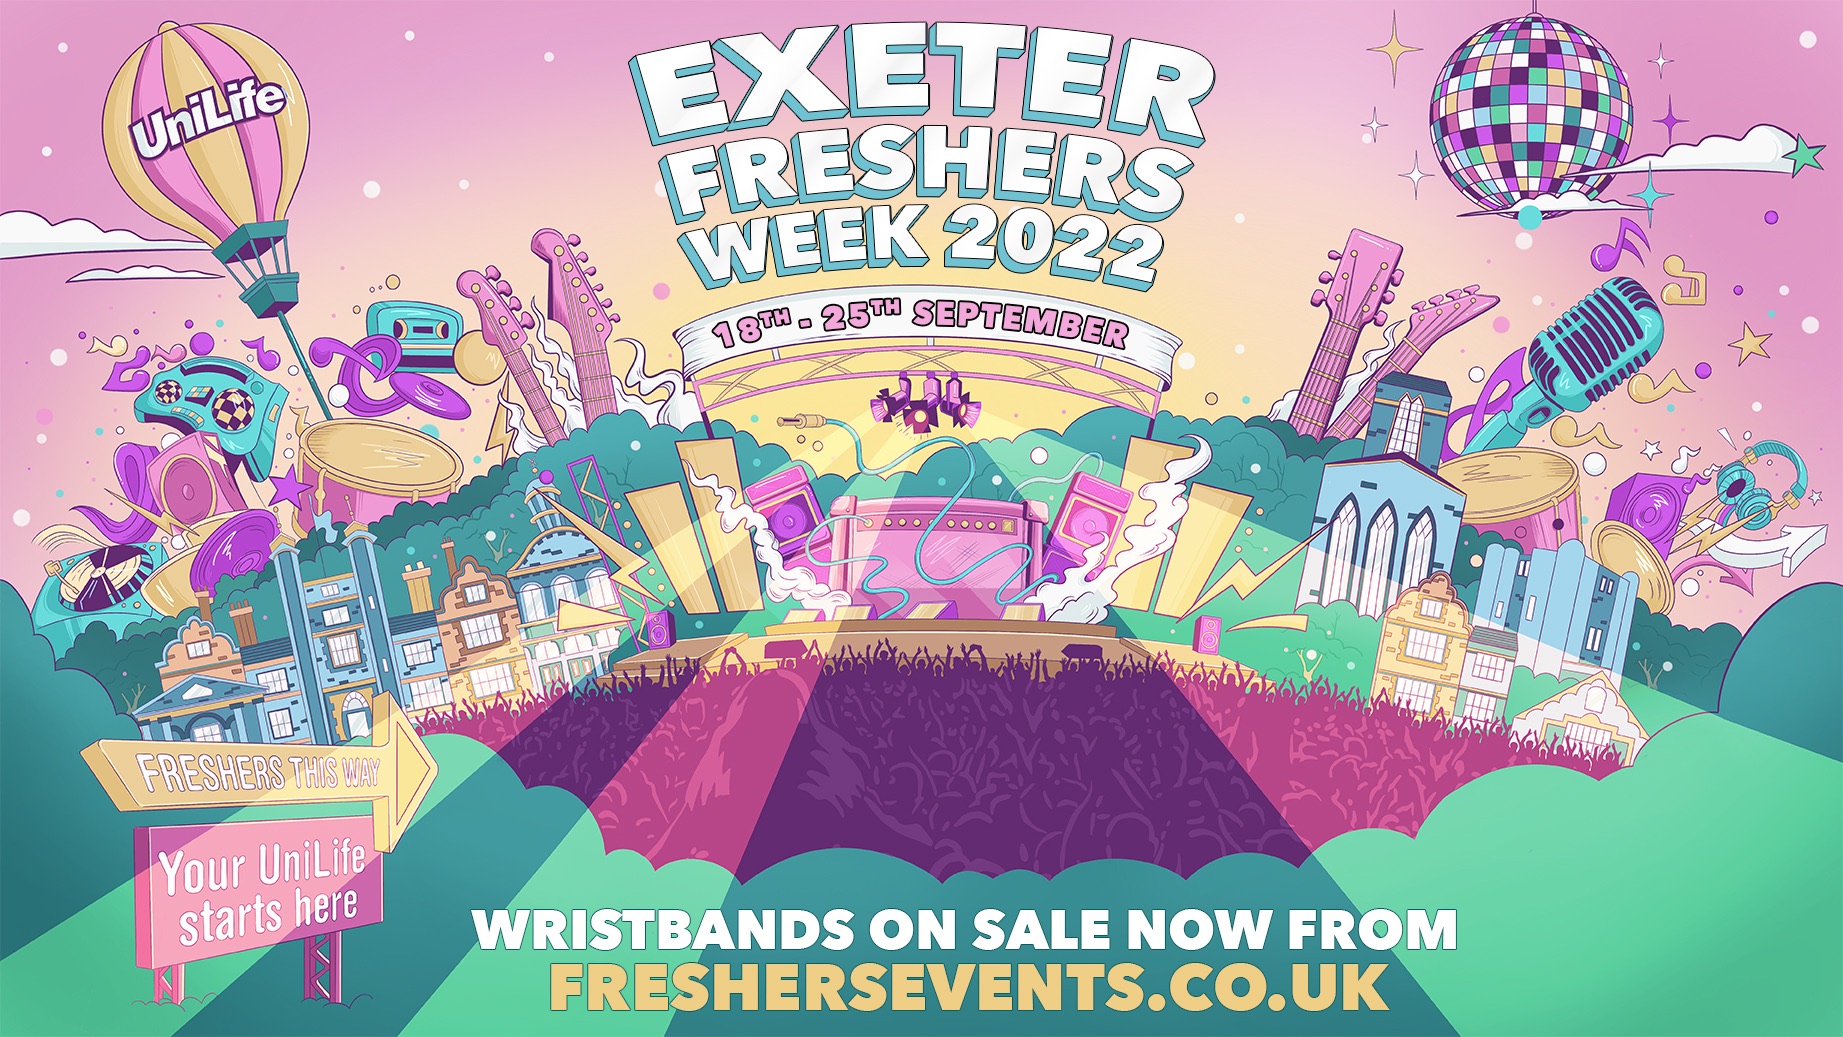 Exeter Freshers Week 2022 First 100 Wristbands only £10 at Multiple